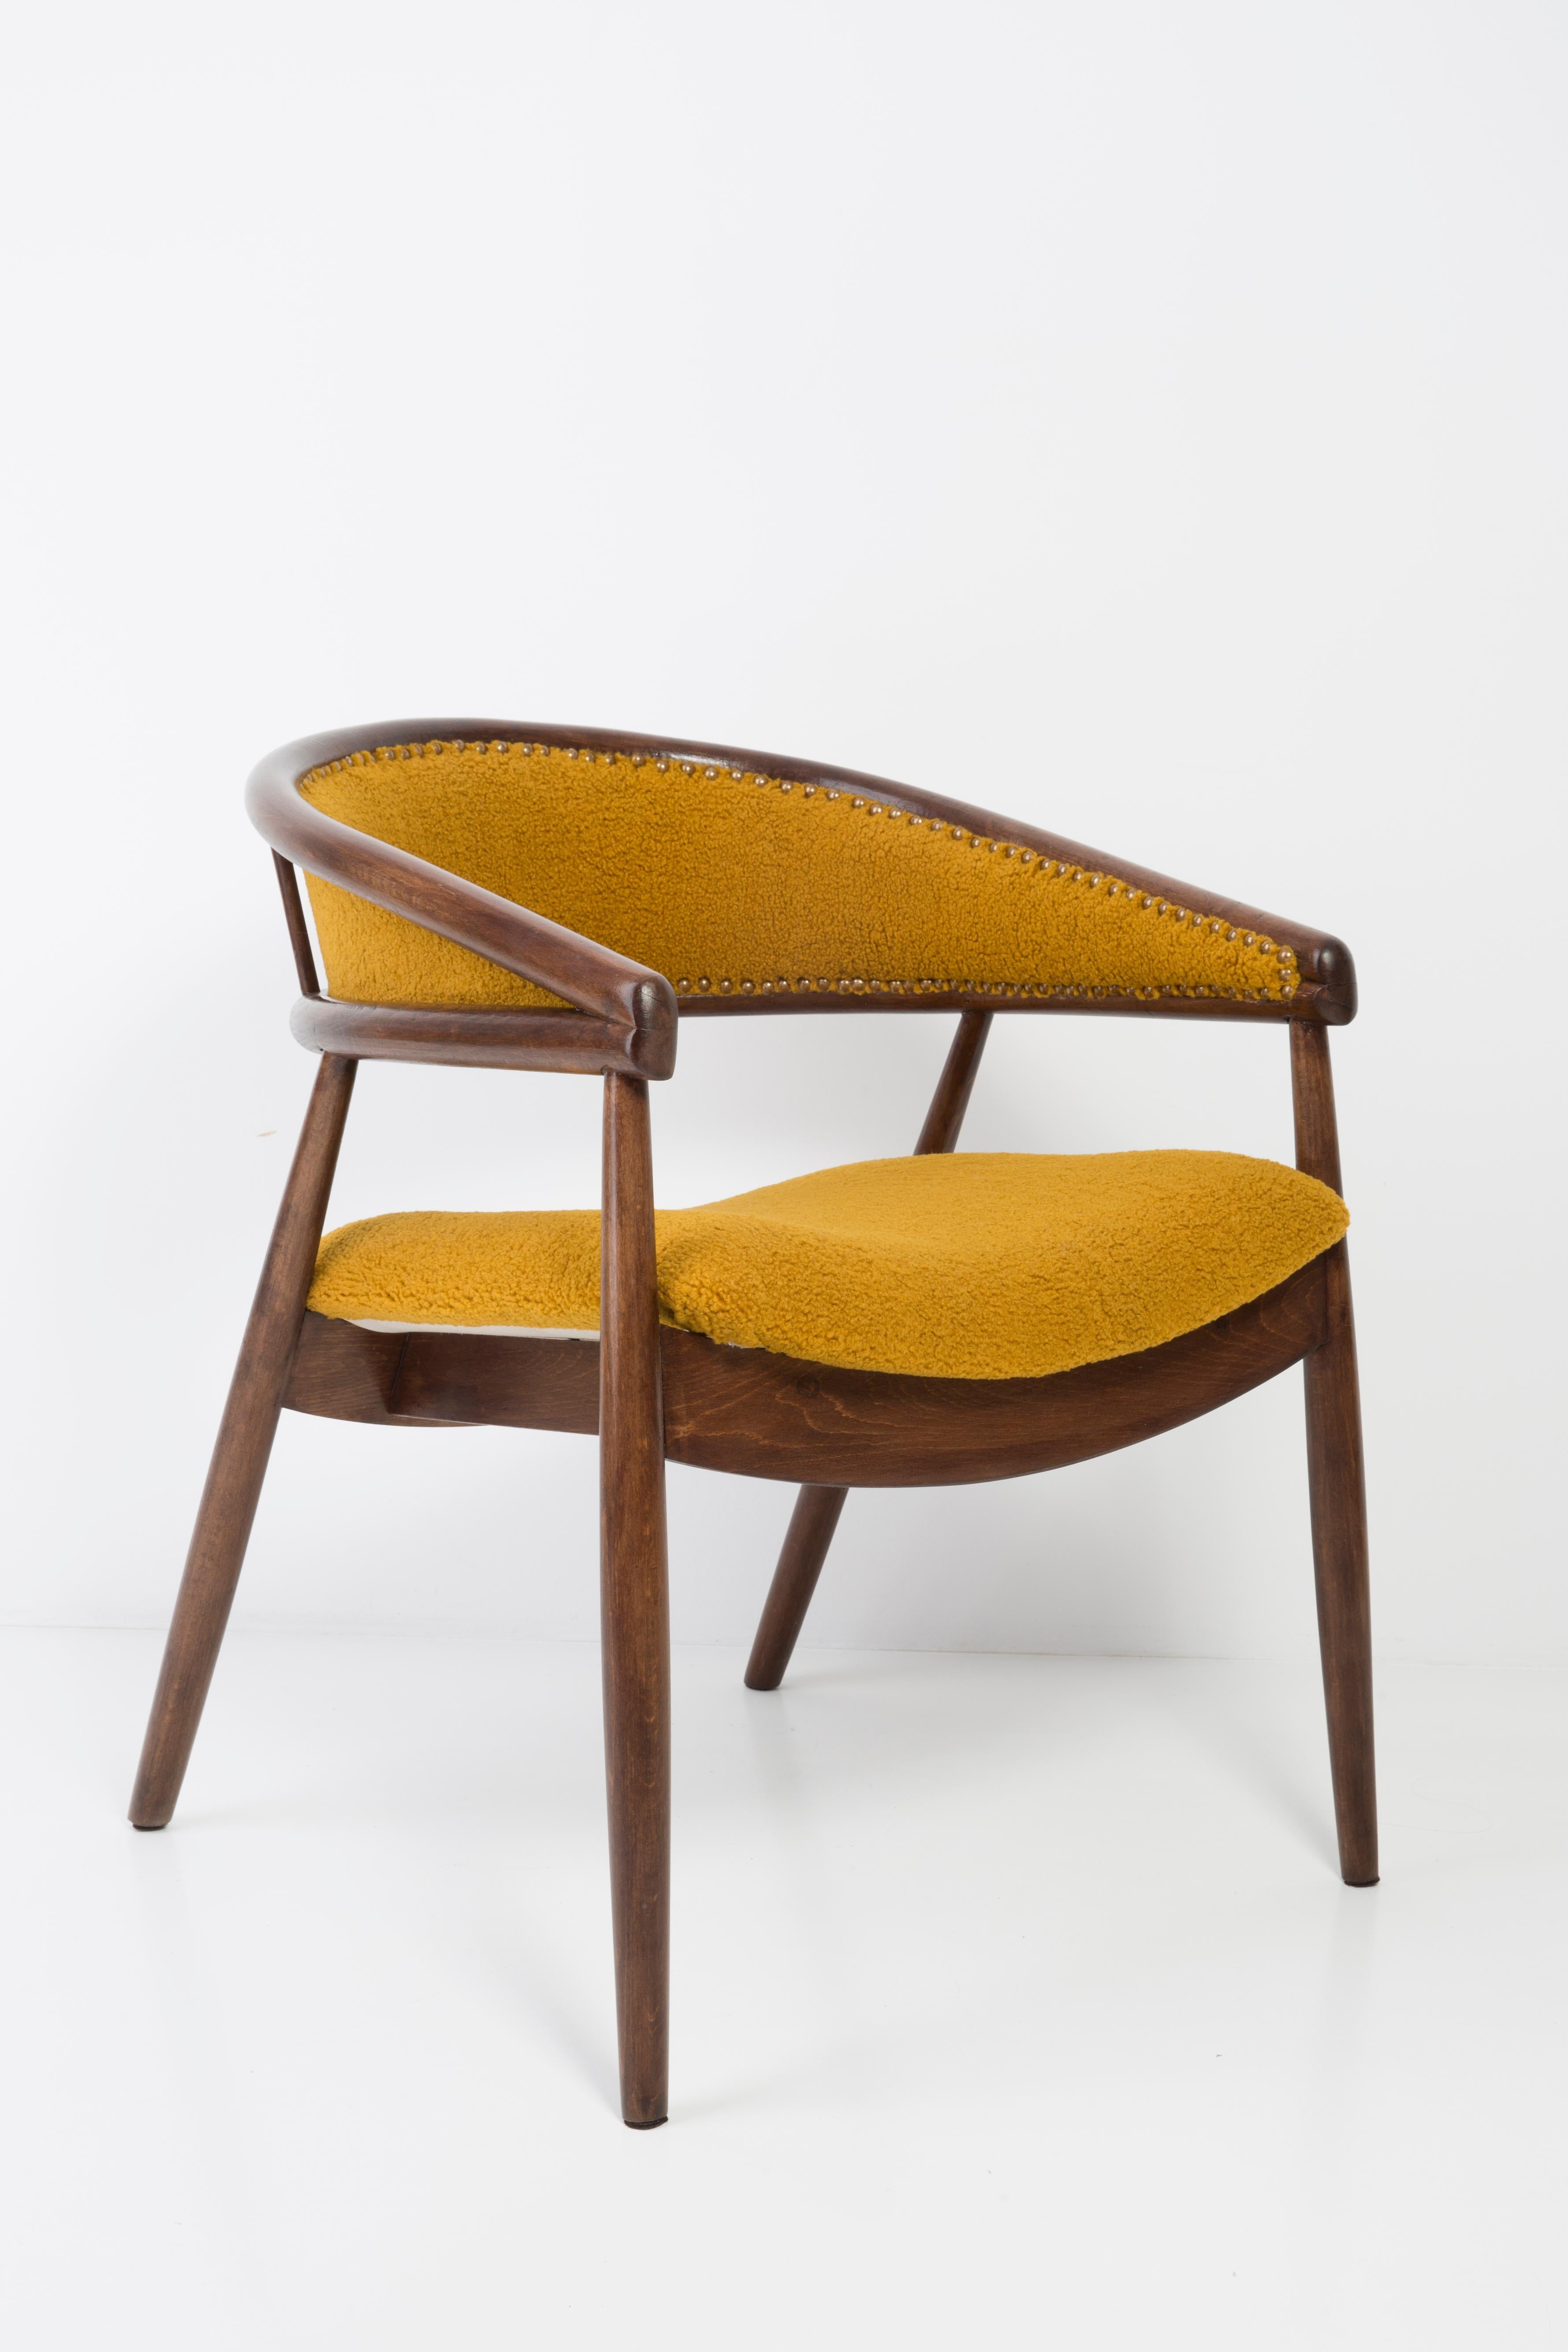 Woodwork Set of James Mont Bent Beech Armchairs and Table, Yellow Ochra Boucle, 1960s For Sale